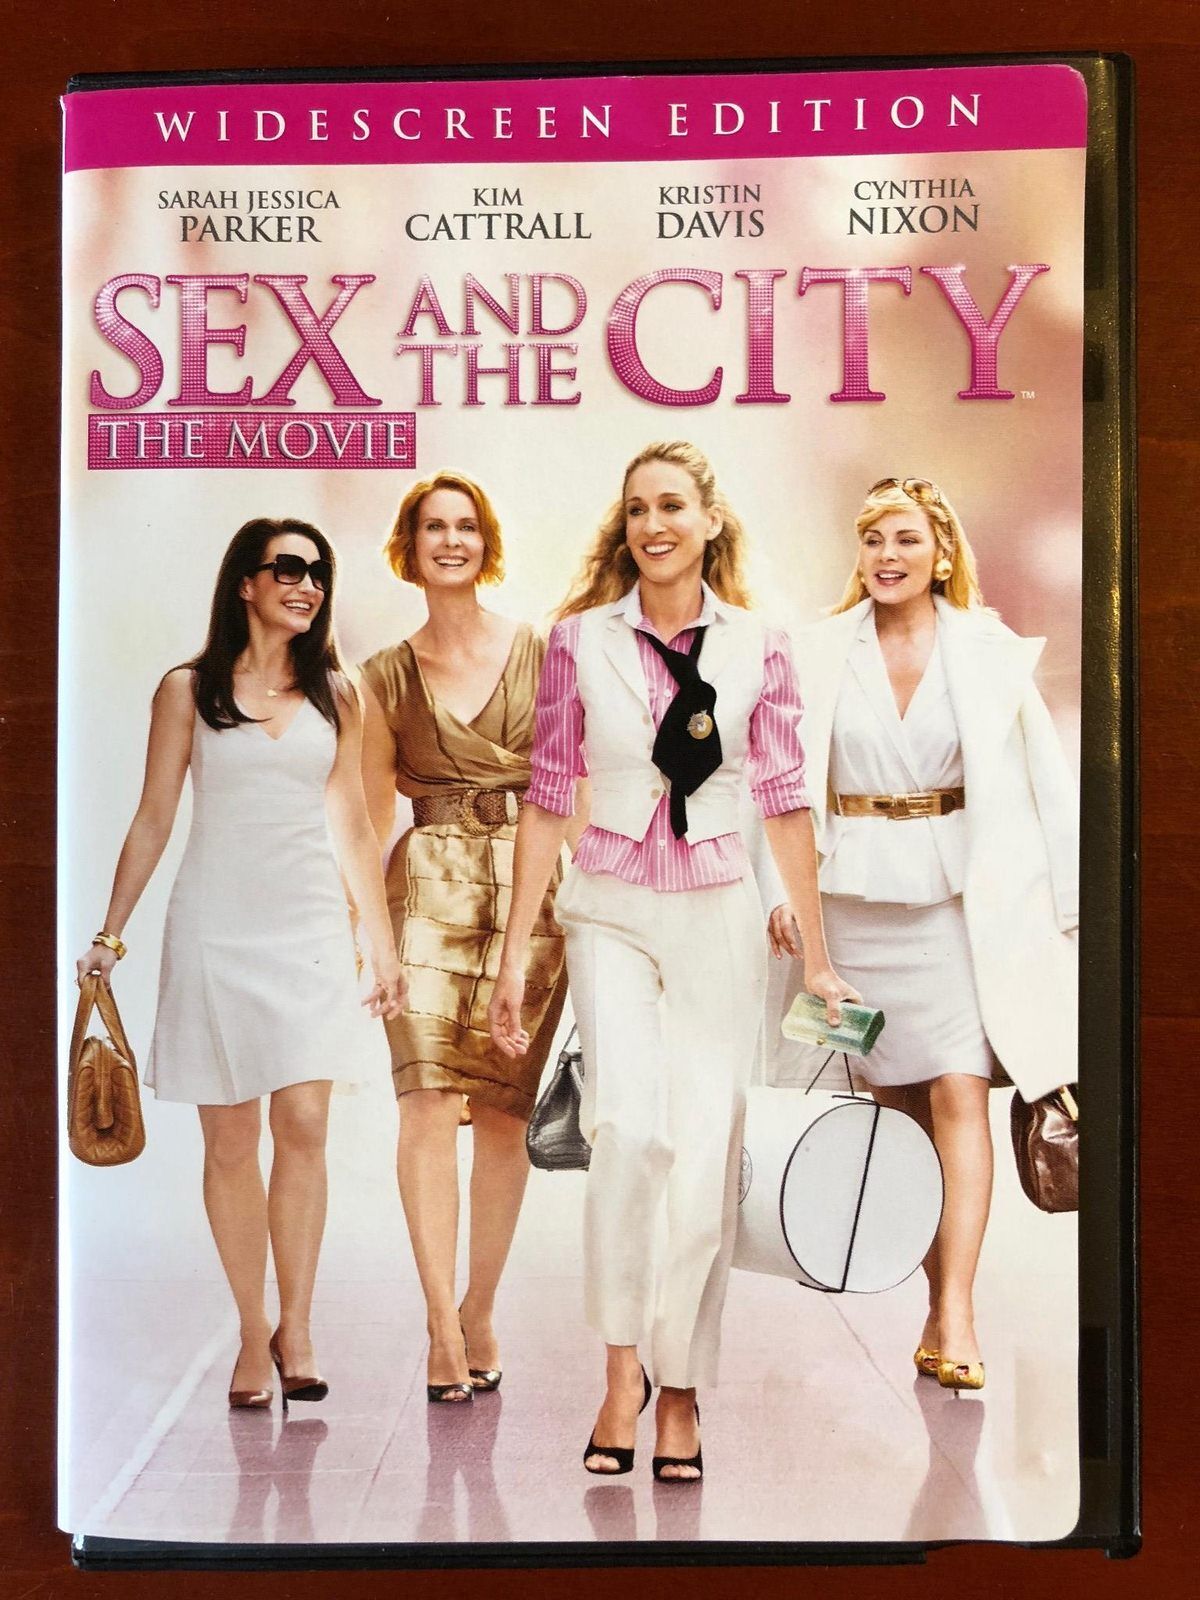 Sex and the City The Movie (DVD, 2008, Widescreen) - J1105